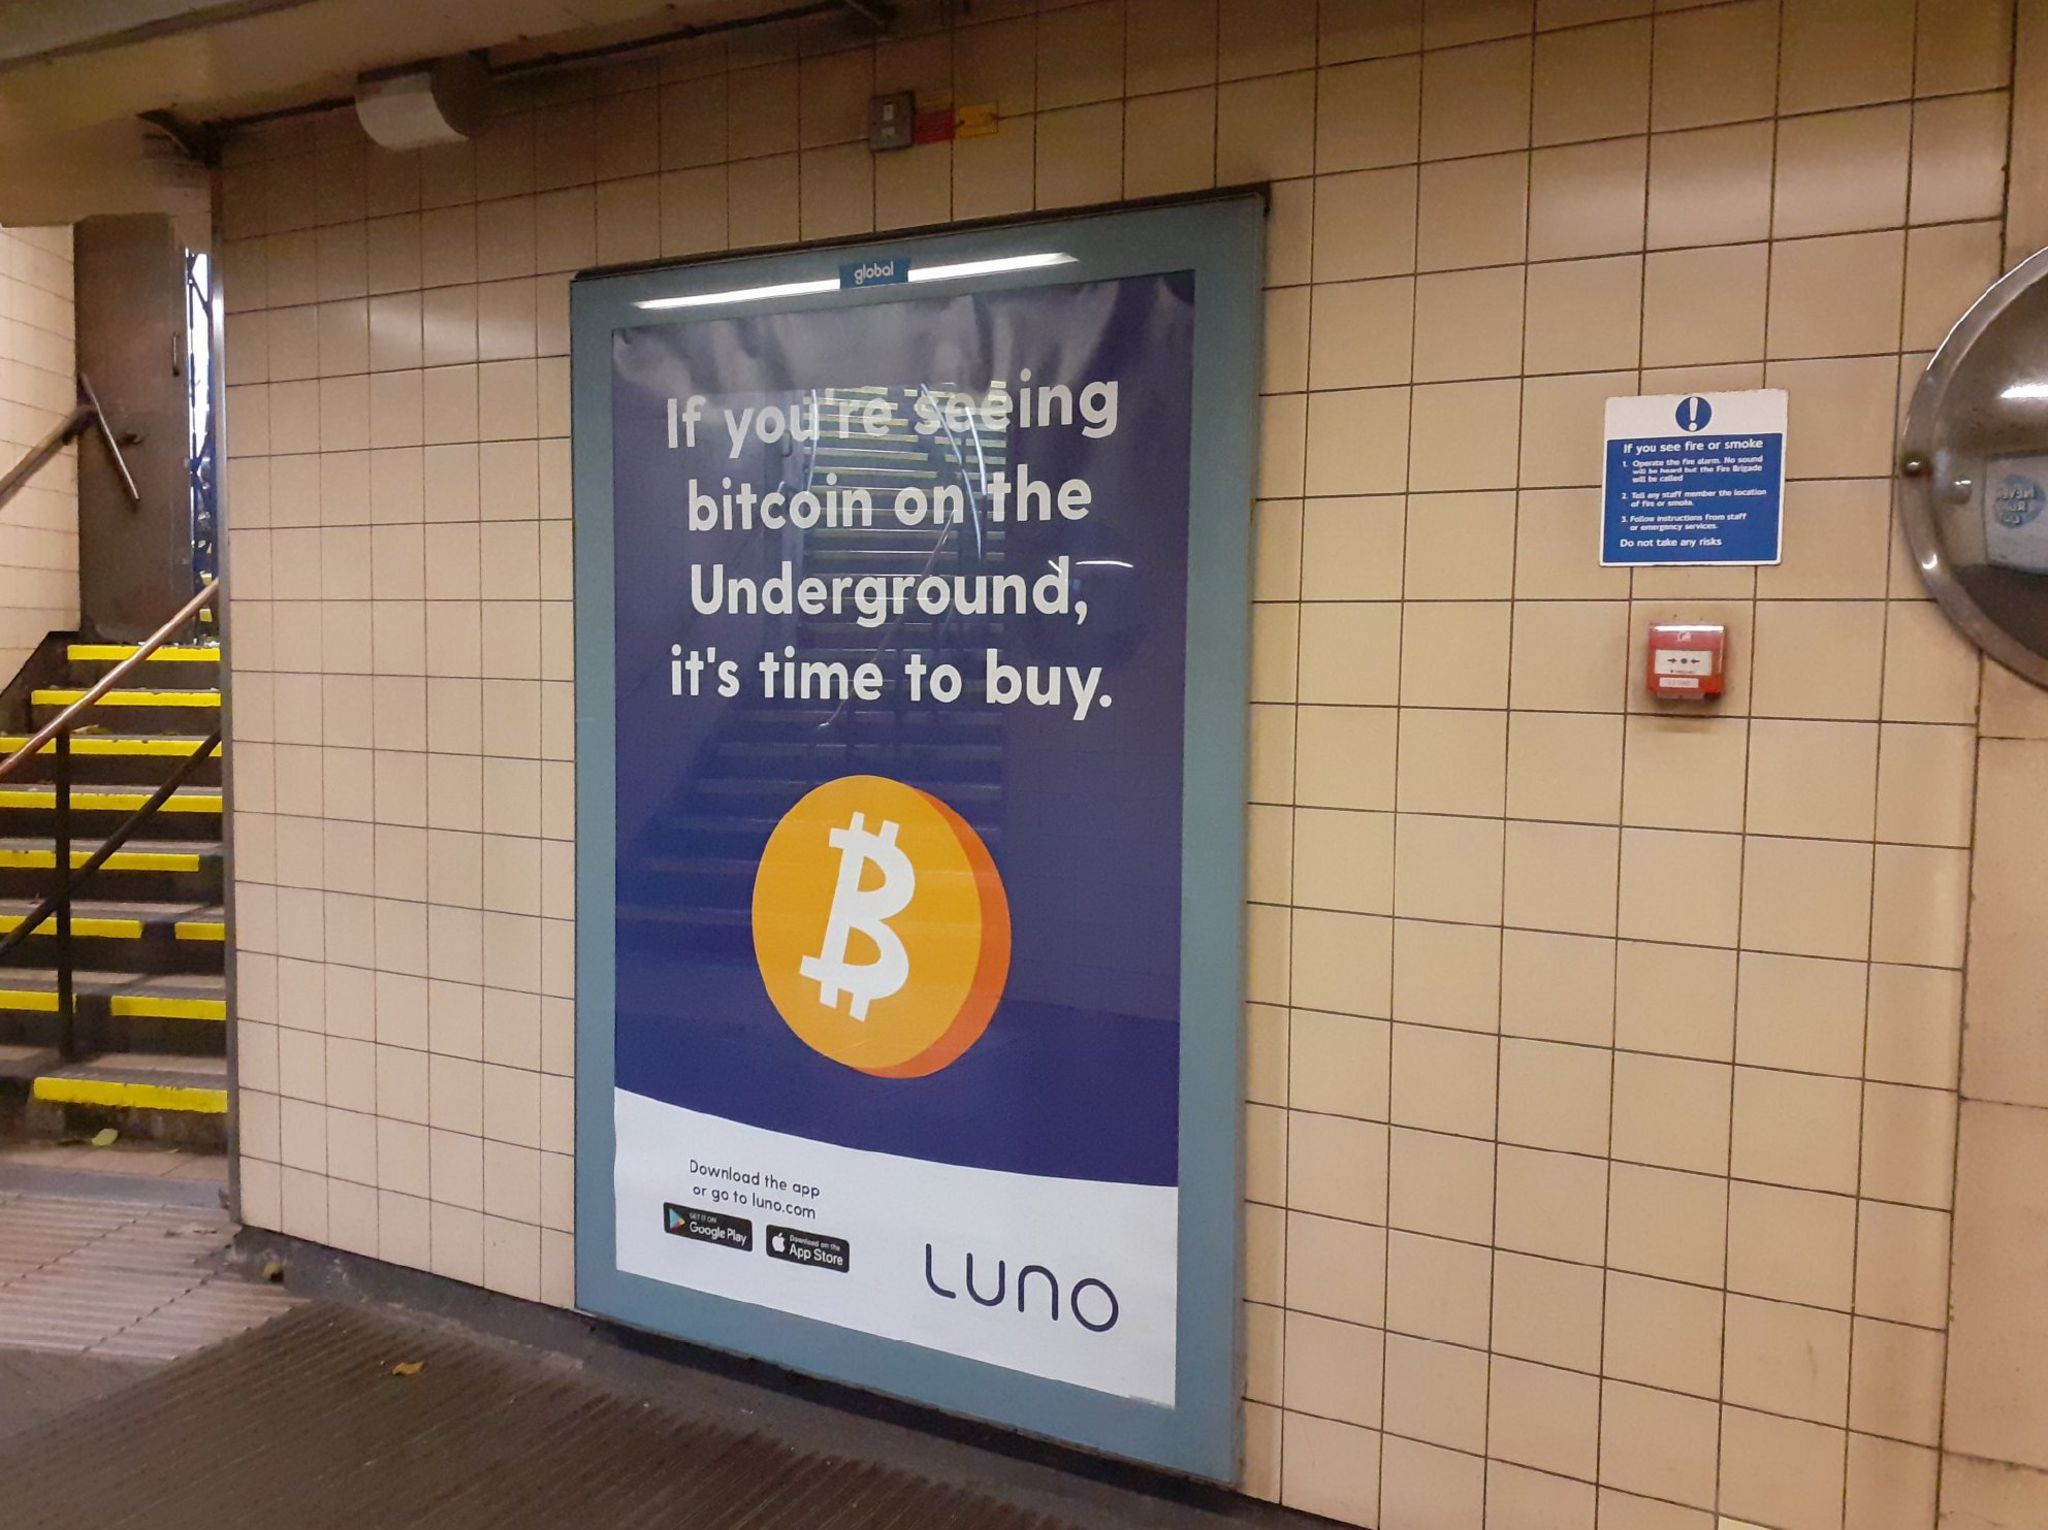 Advert on the London Underground saying "If you're seeing Bitcoin on the underground, it's time to buy"